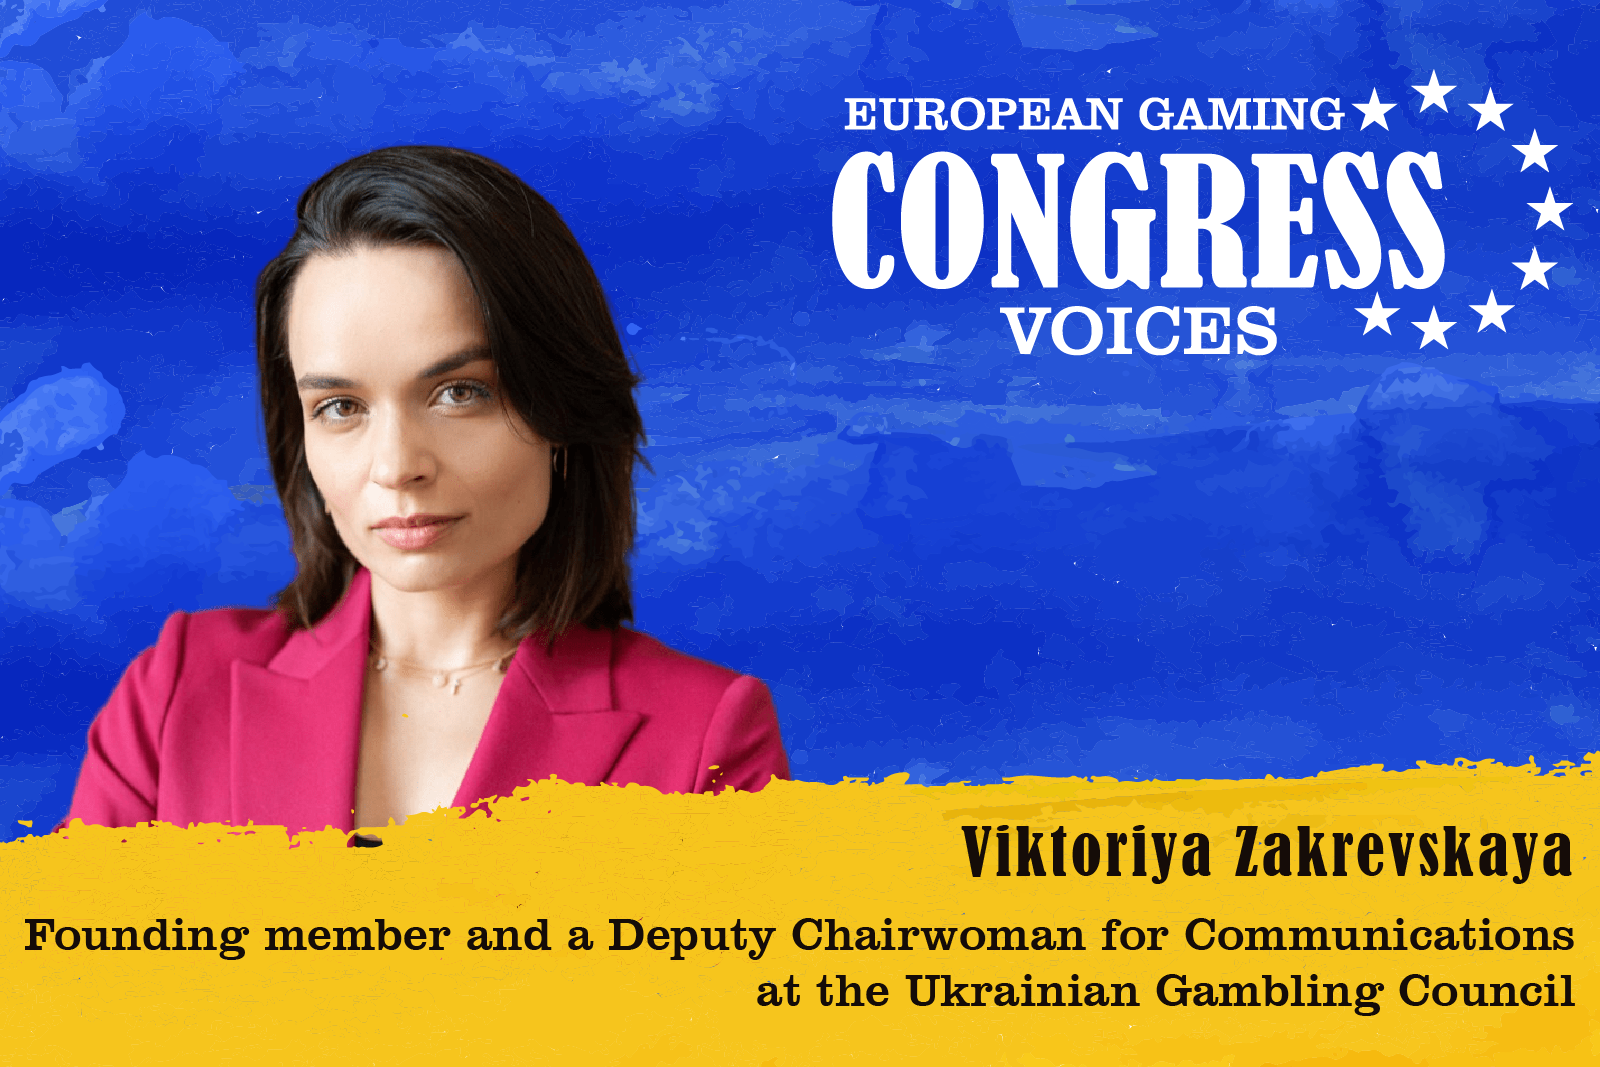 Ukraine’s Evolving Gambling Landscape: Insights from the Panel of European Gaming Congress in Warsaw